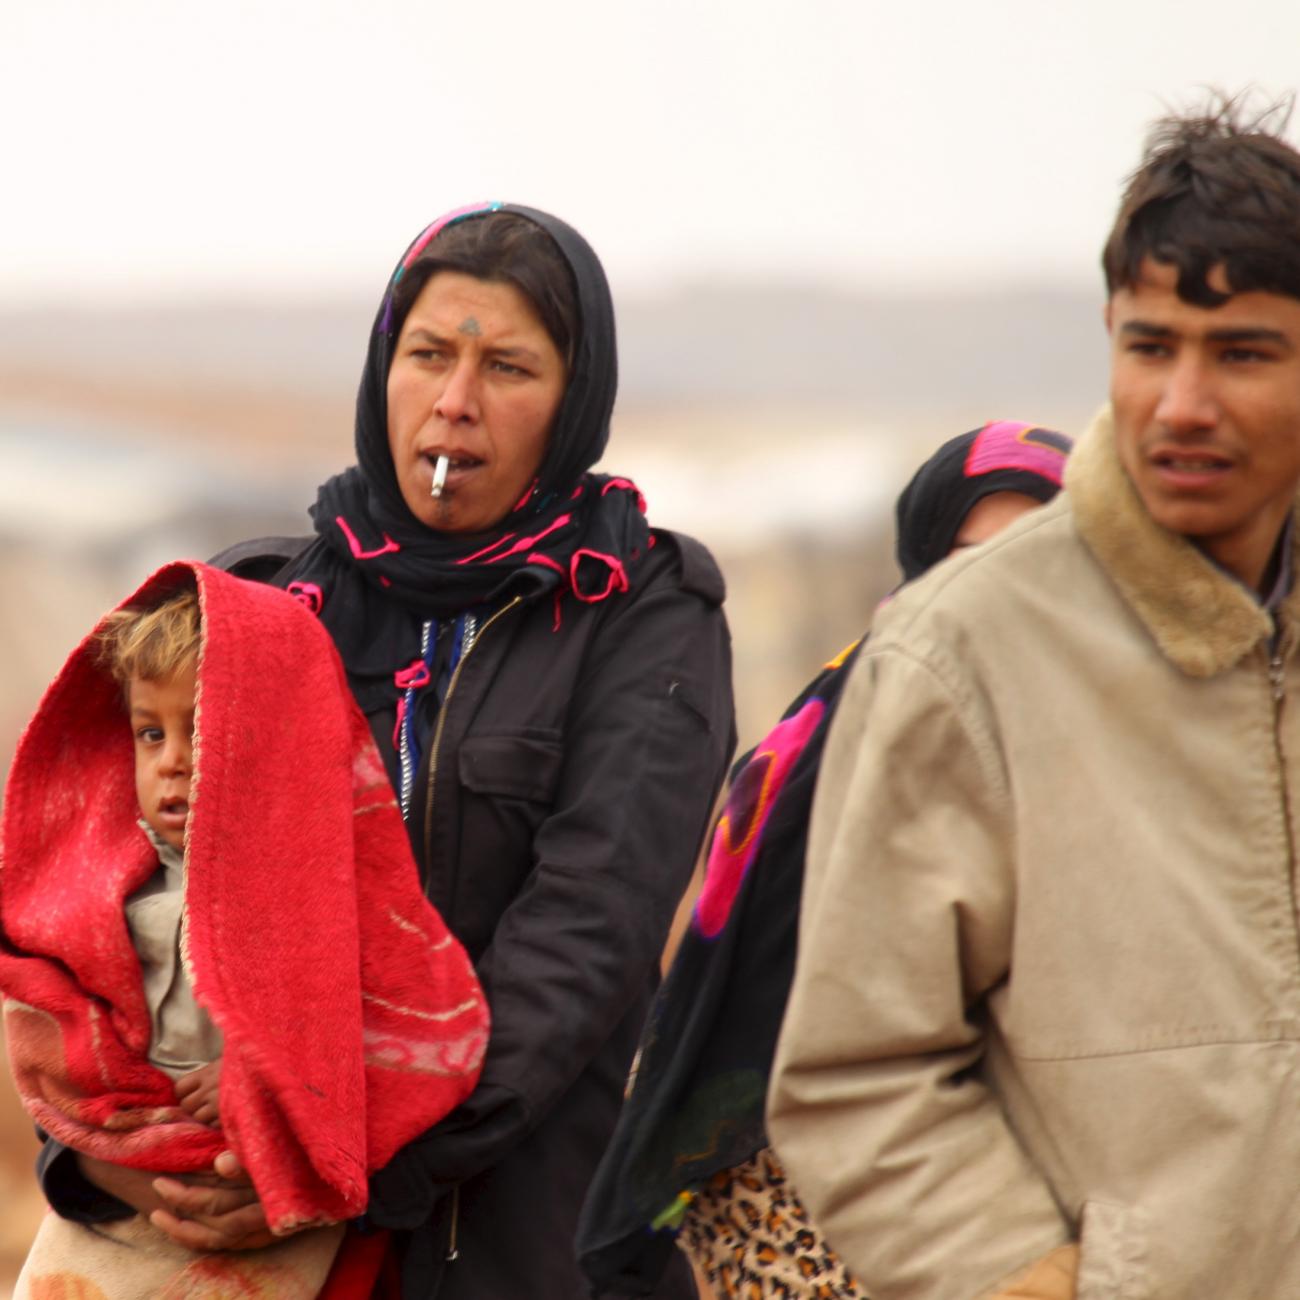 An Syrian woman with a serious expression on her face dressed in dark colors holds a child who is partially obscured by a bright orange scarf draped over his head. On either side of her, are young men in winter coats walking with her through a desert landscape